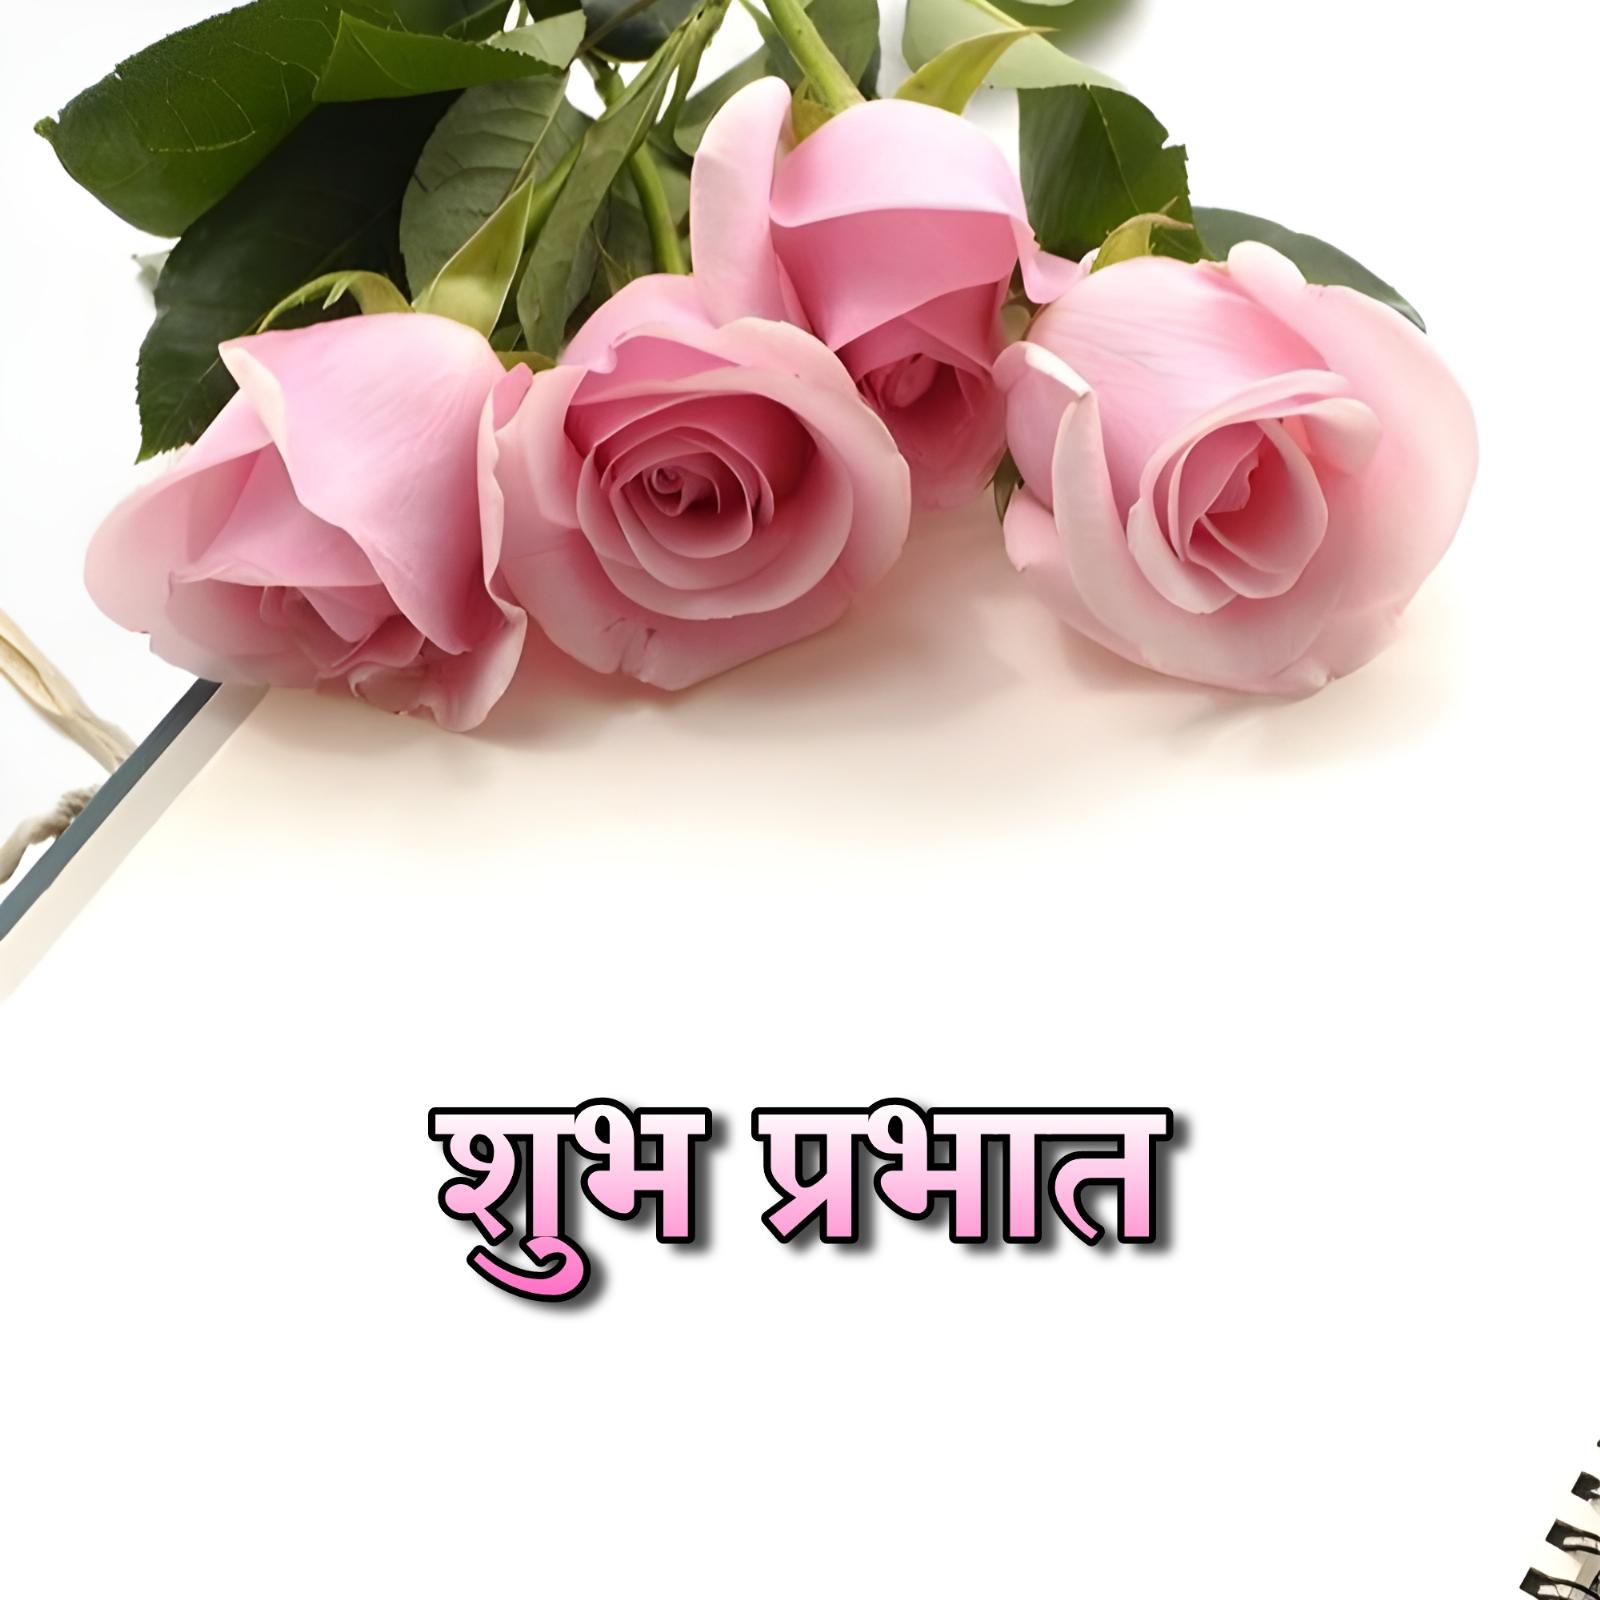 Shubh Prabhat Images With Pink Rose Flowers